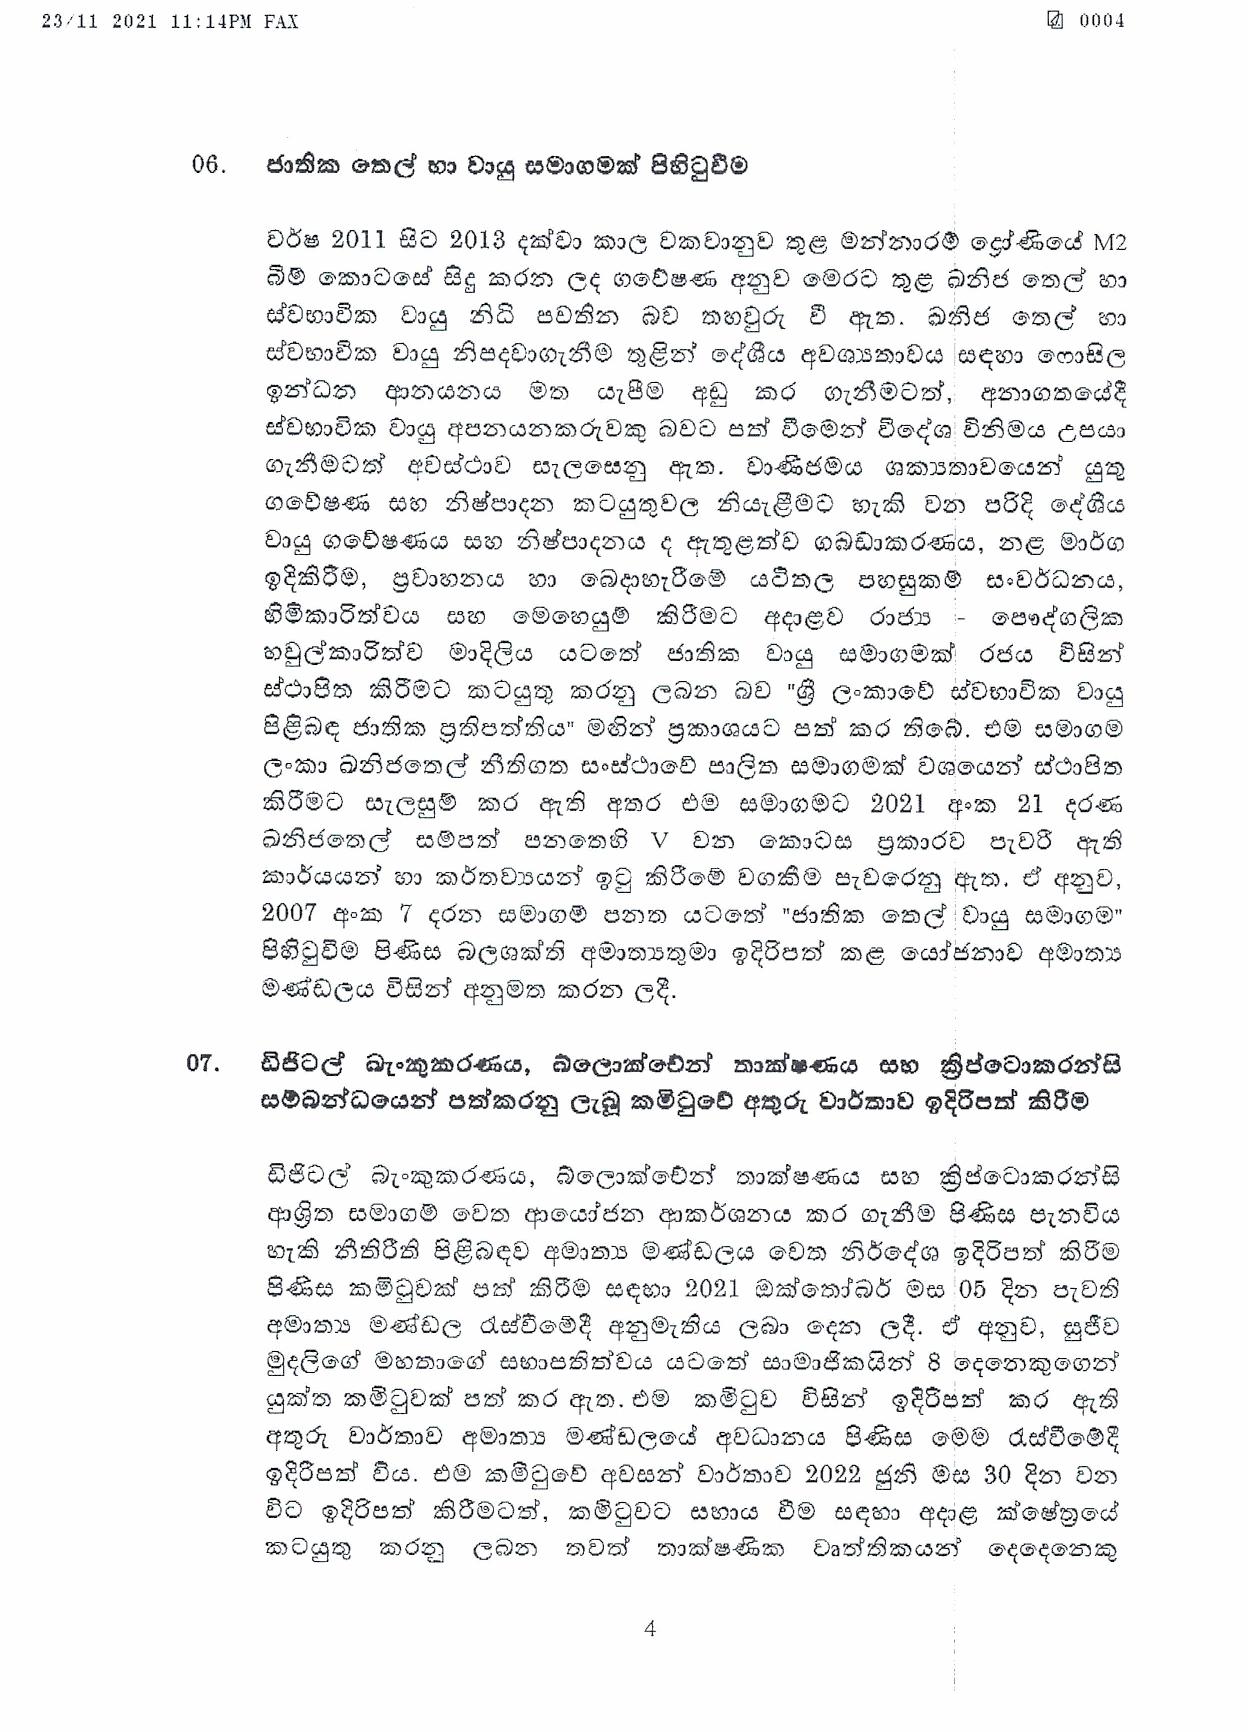 Cabinet Decision on 23.11.2021 page 004